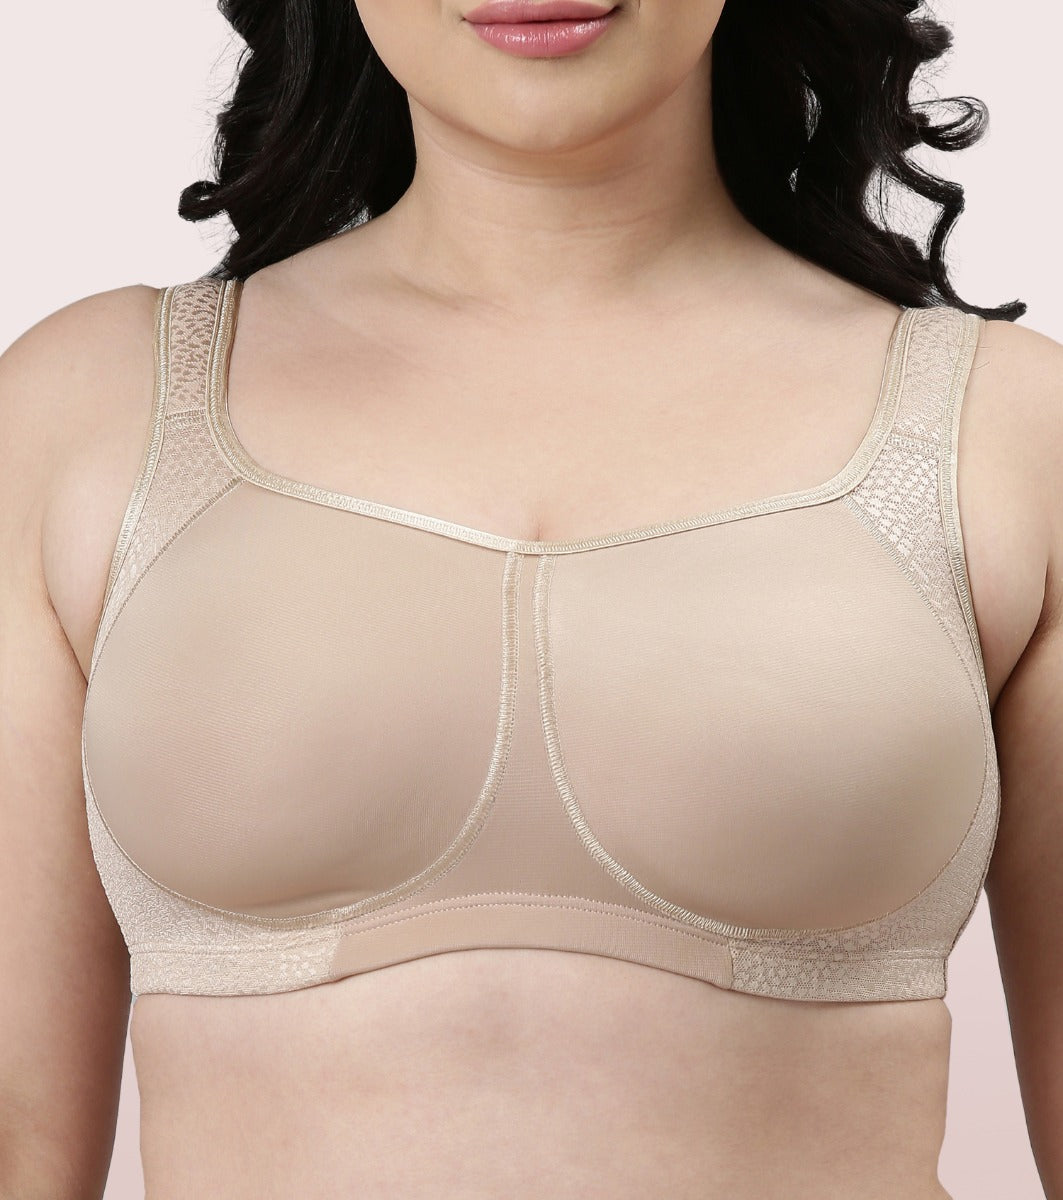 F Cup Size Minimiser Bra in Warangal - Dealers, Manufacturers & Suppliers -  Justdial